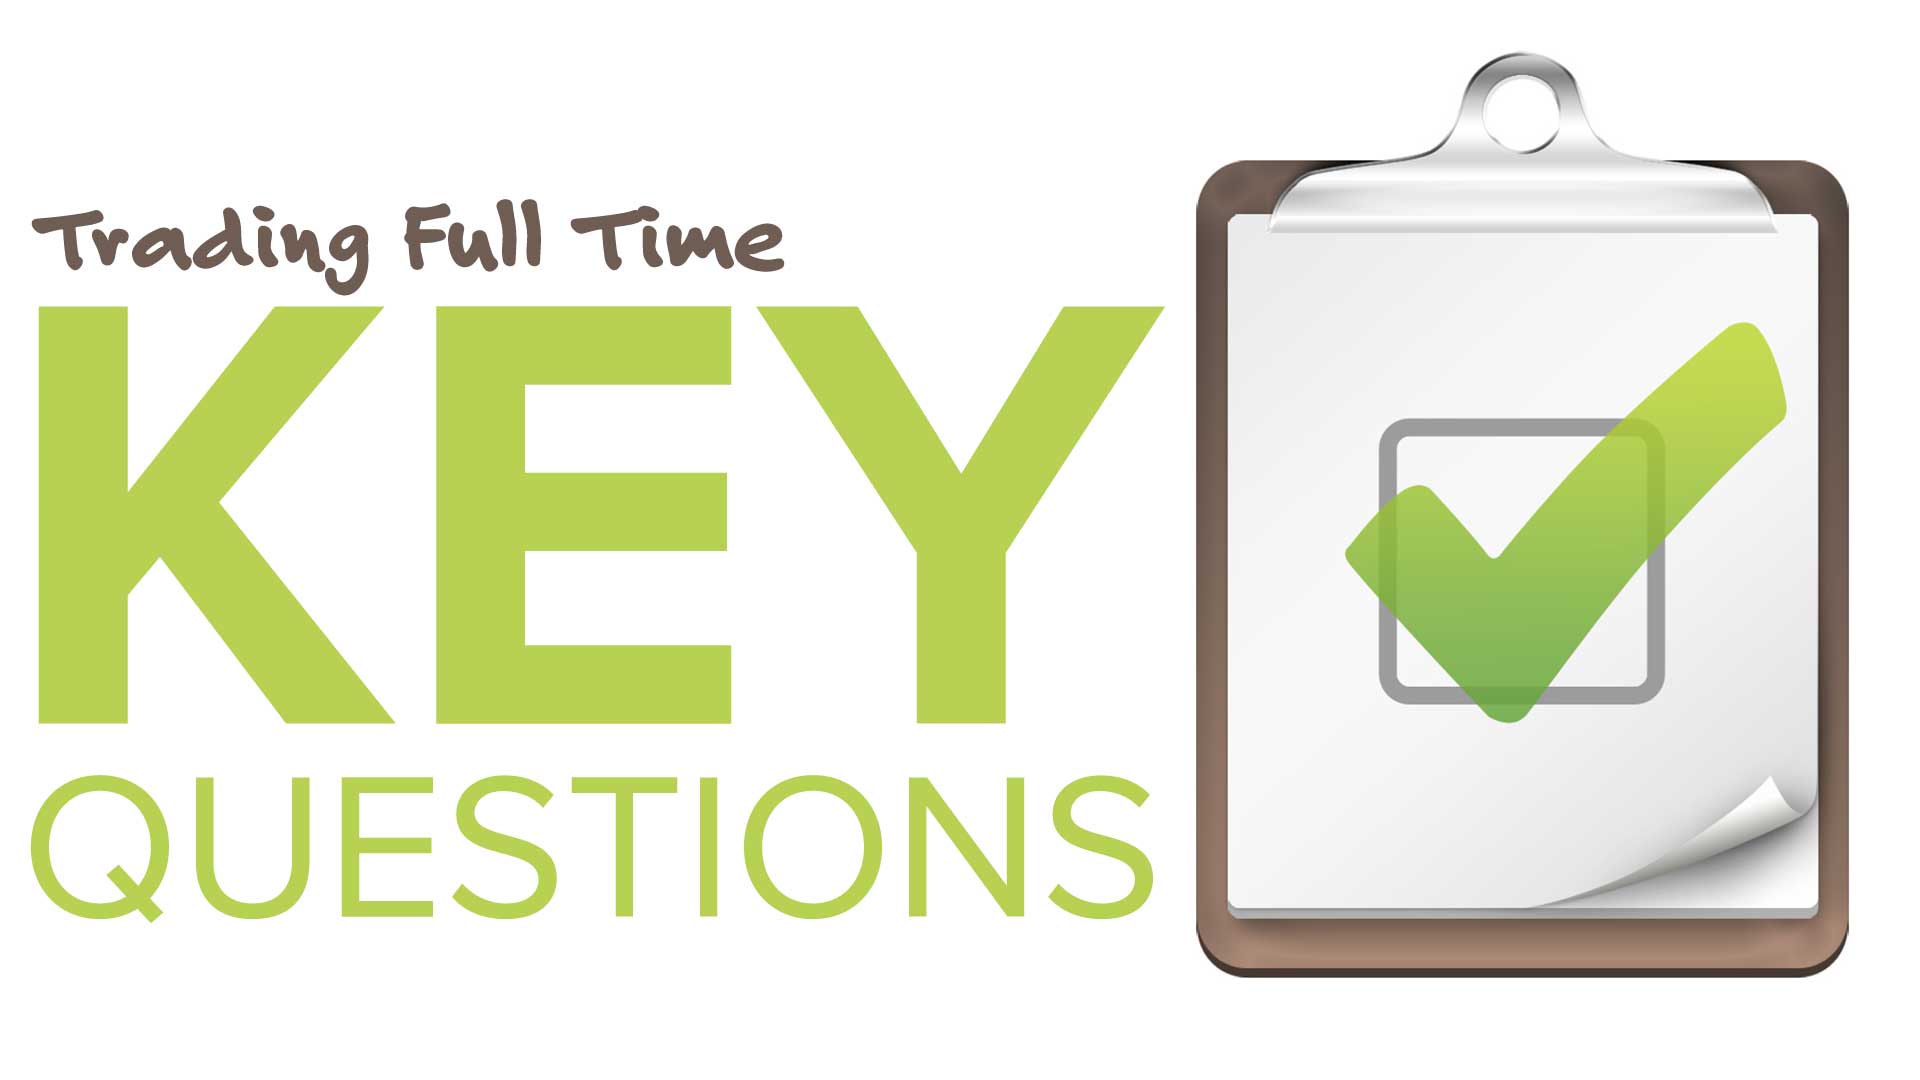 Trading Full Time: Key Questions